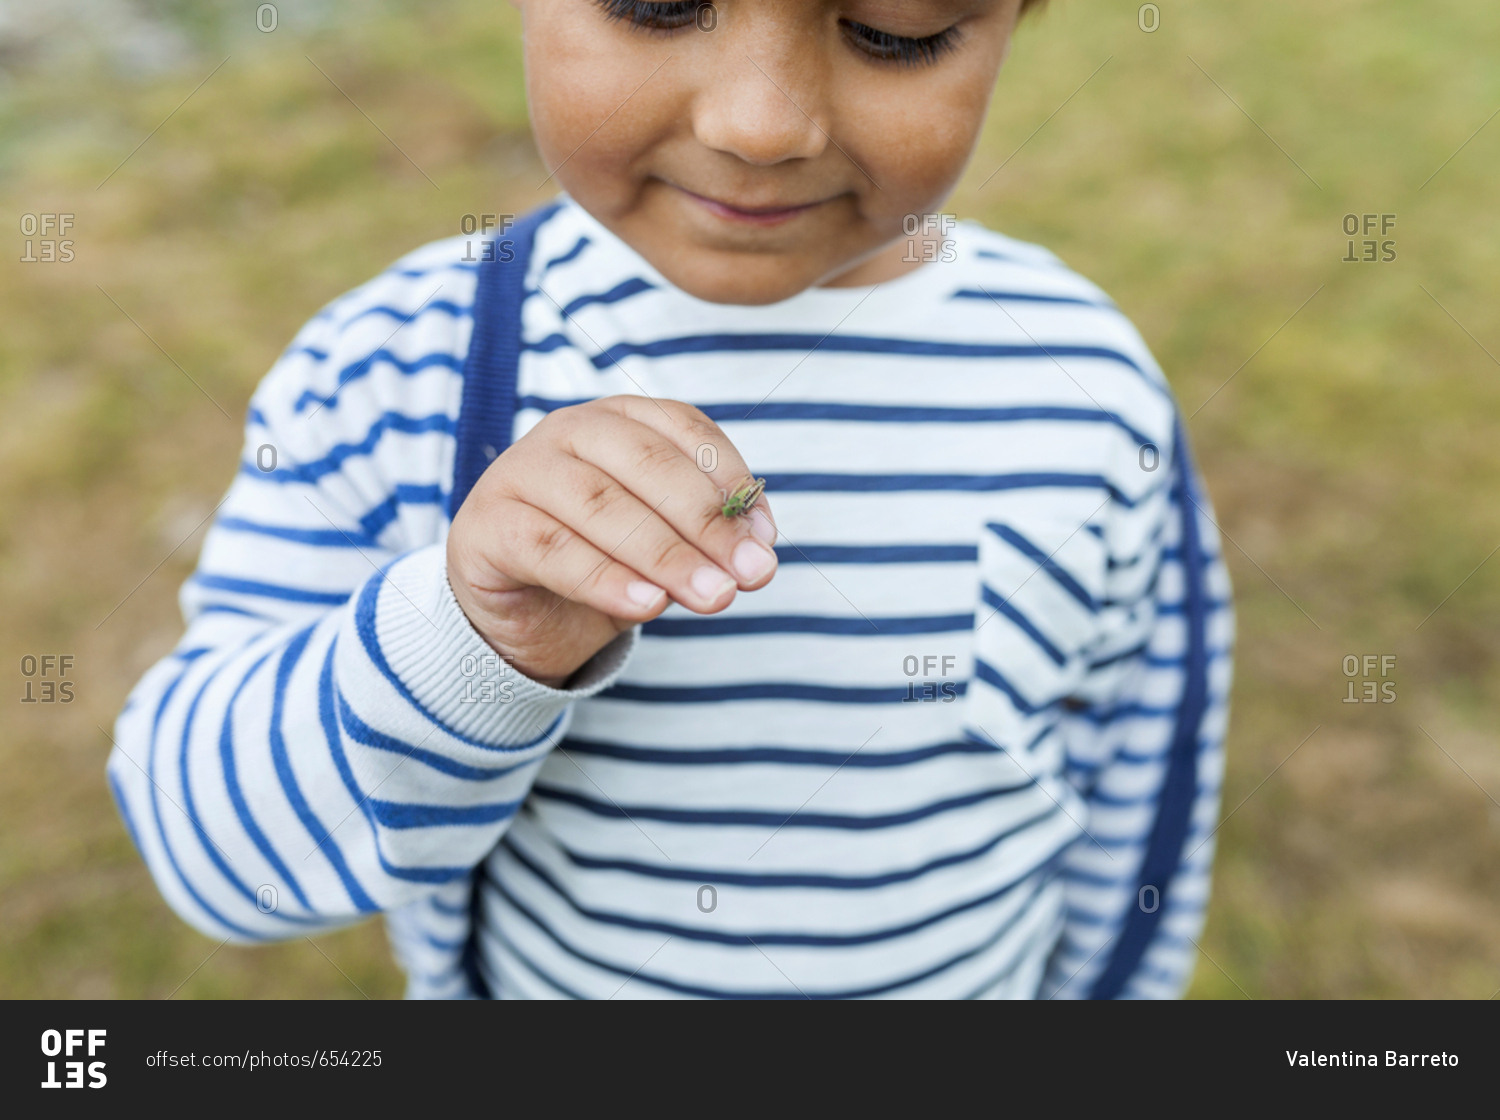 Little boy making friends with tiny cricket on hand